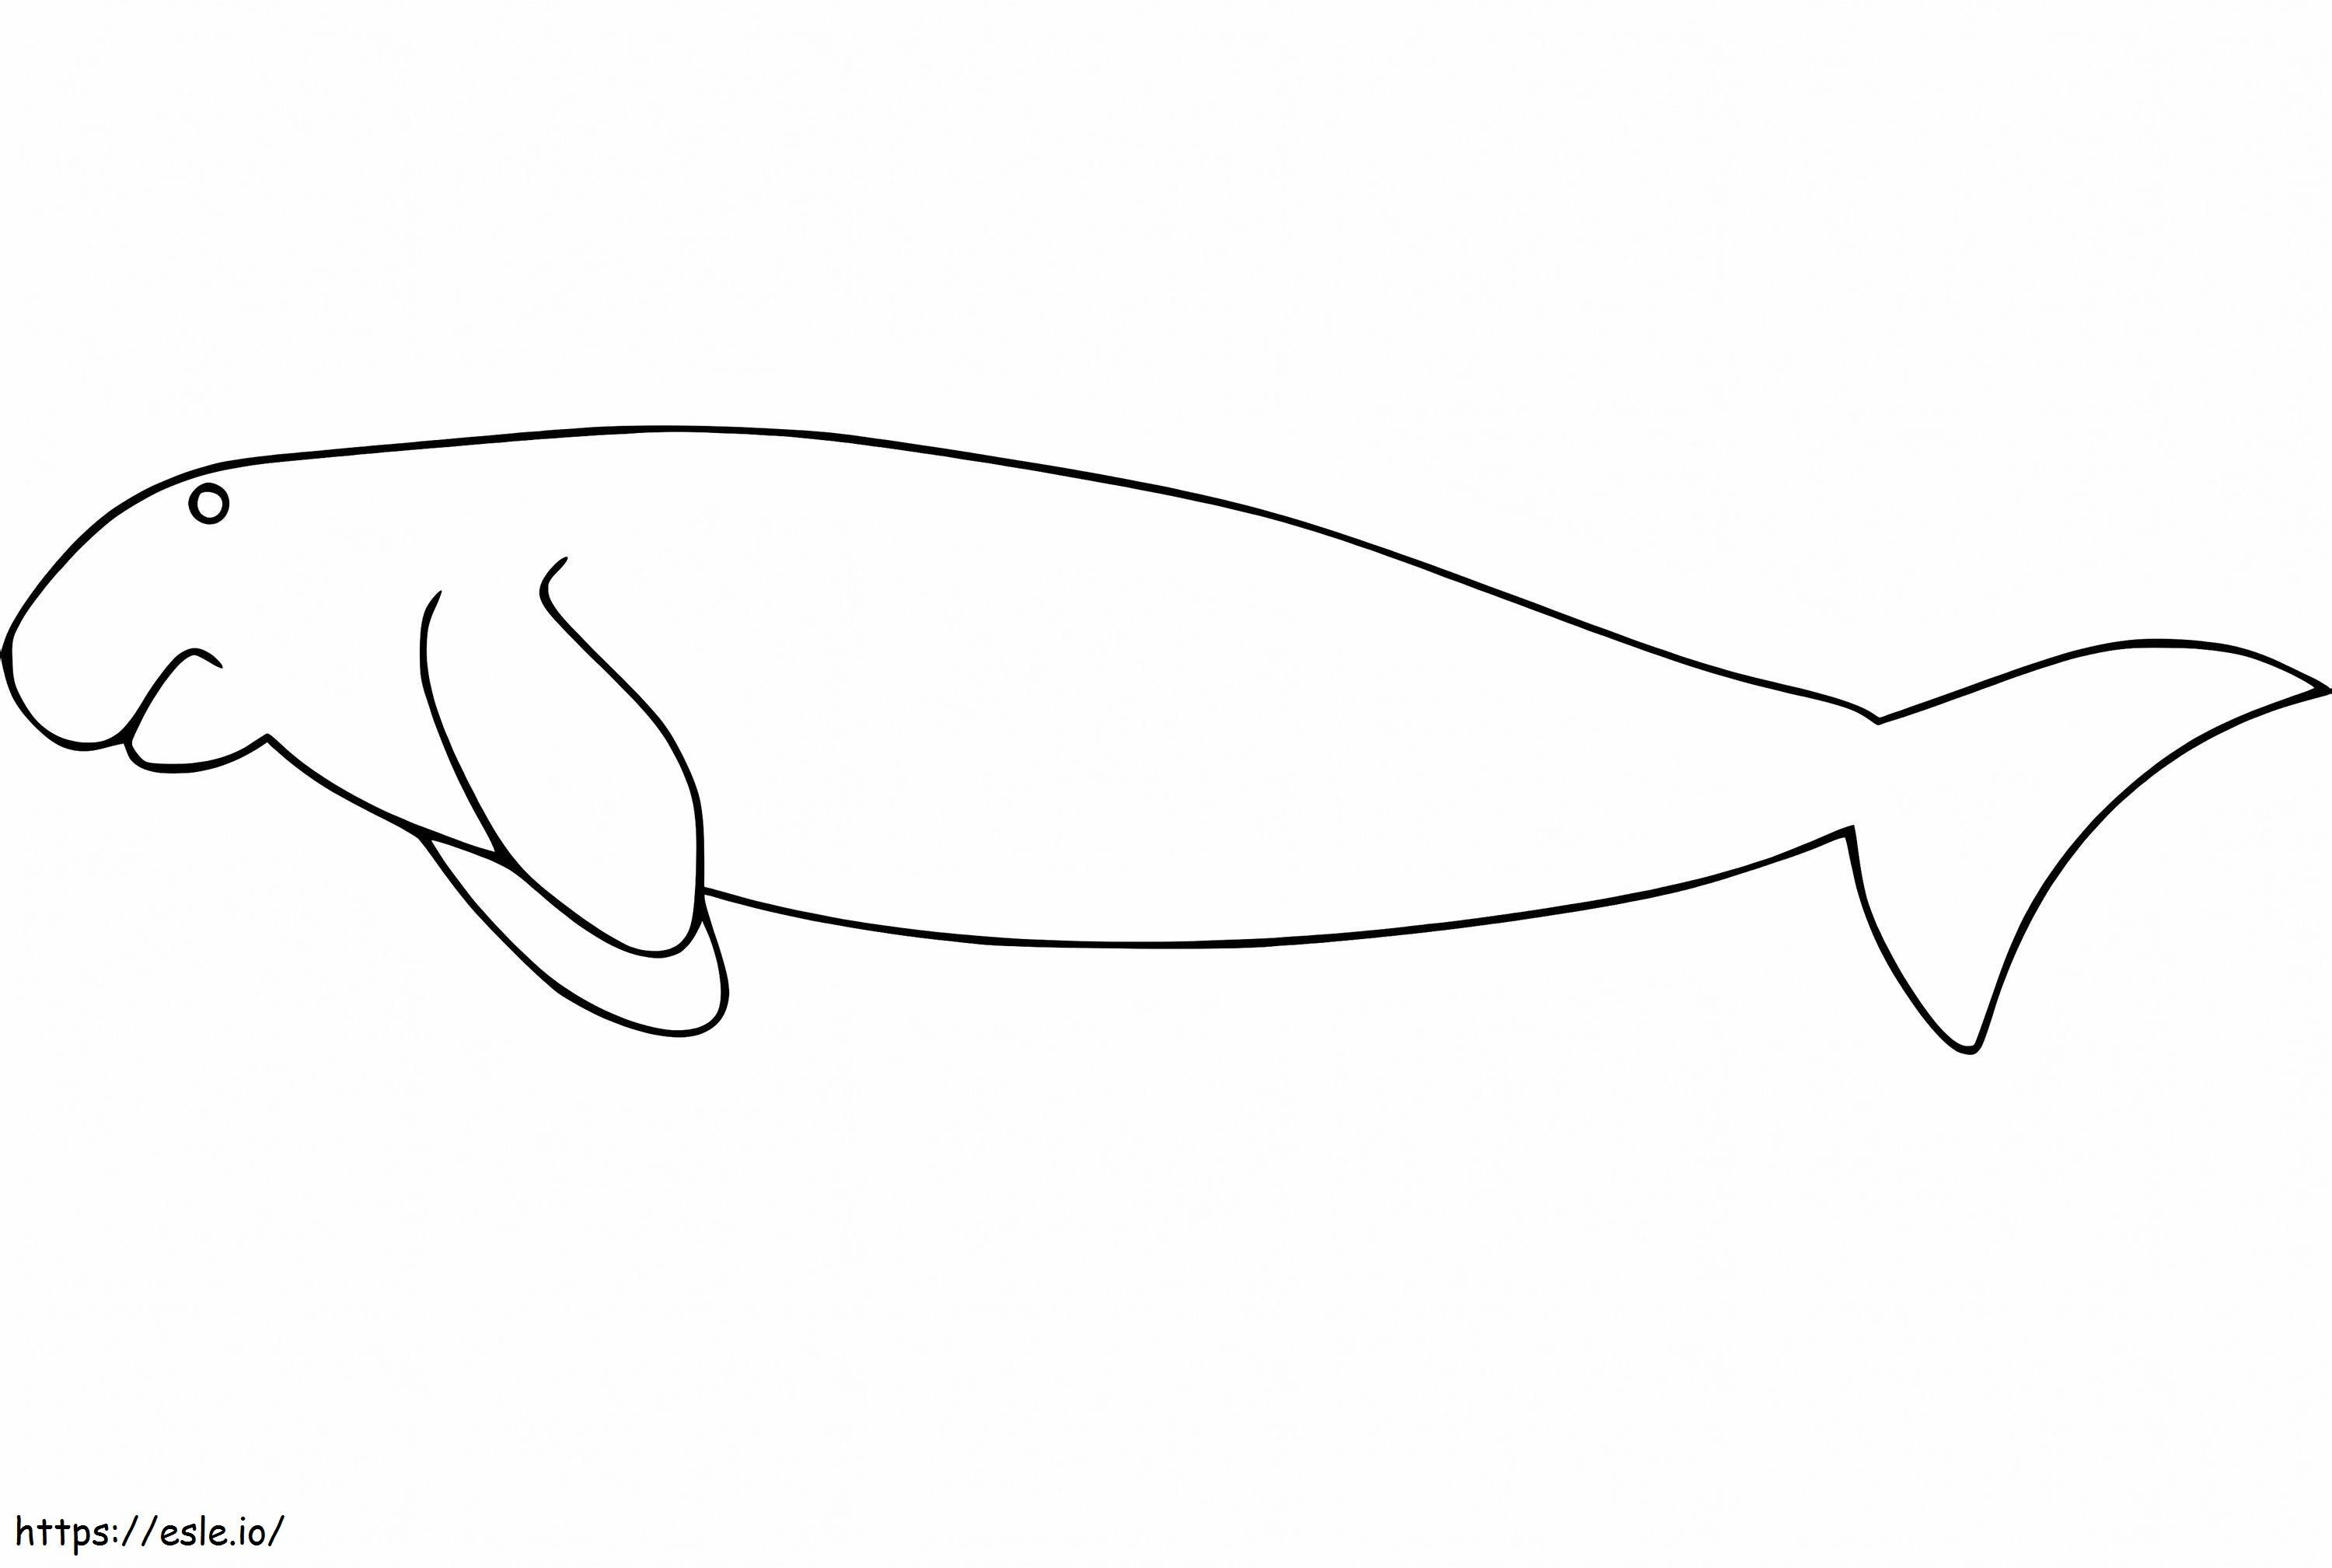 Easy Dugong coloring page